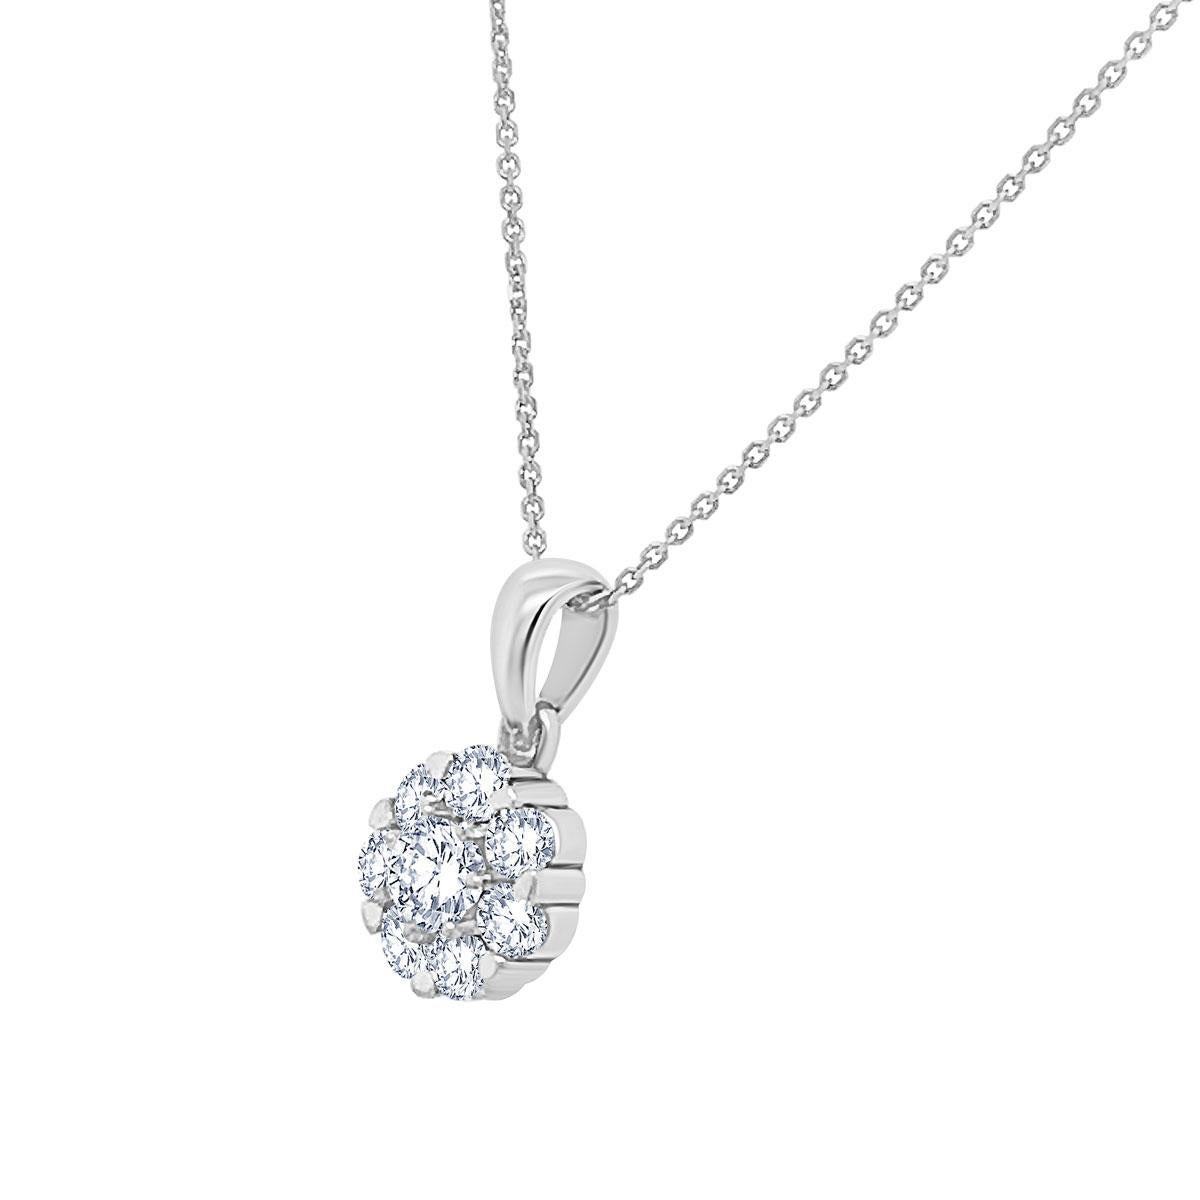 This sparkling halo diamond pendant features seven round brilliant diamonds surrounding a round brilliant center diamond.  This 0.76 carat total weight pendant is made in 14k white gold and is  all glitter!.

Product details: 

Center Gemstone Type: